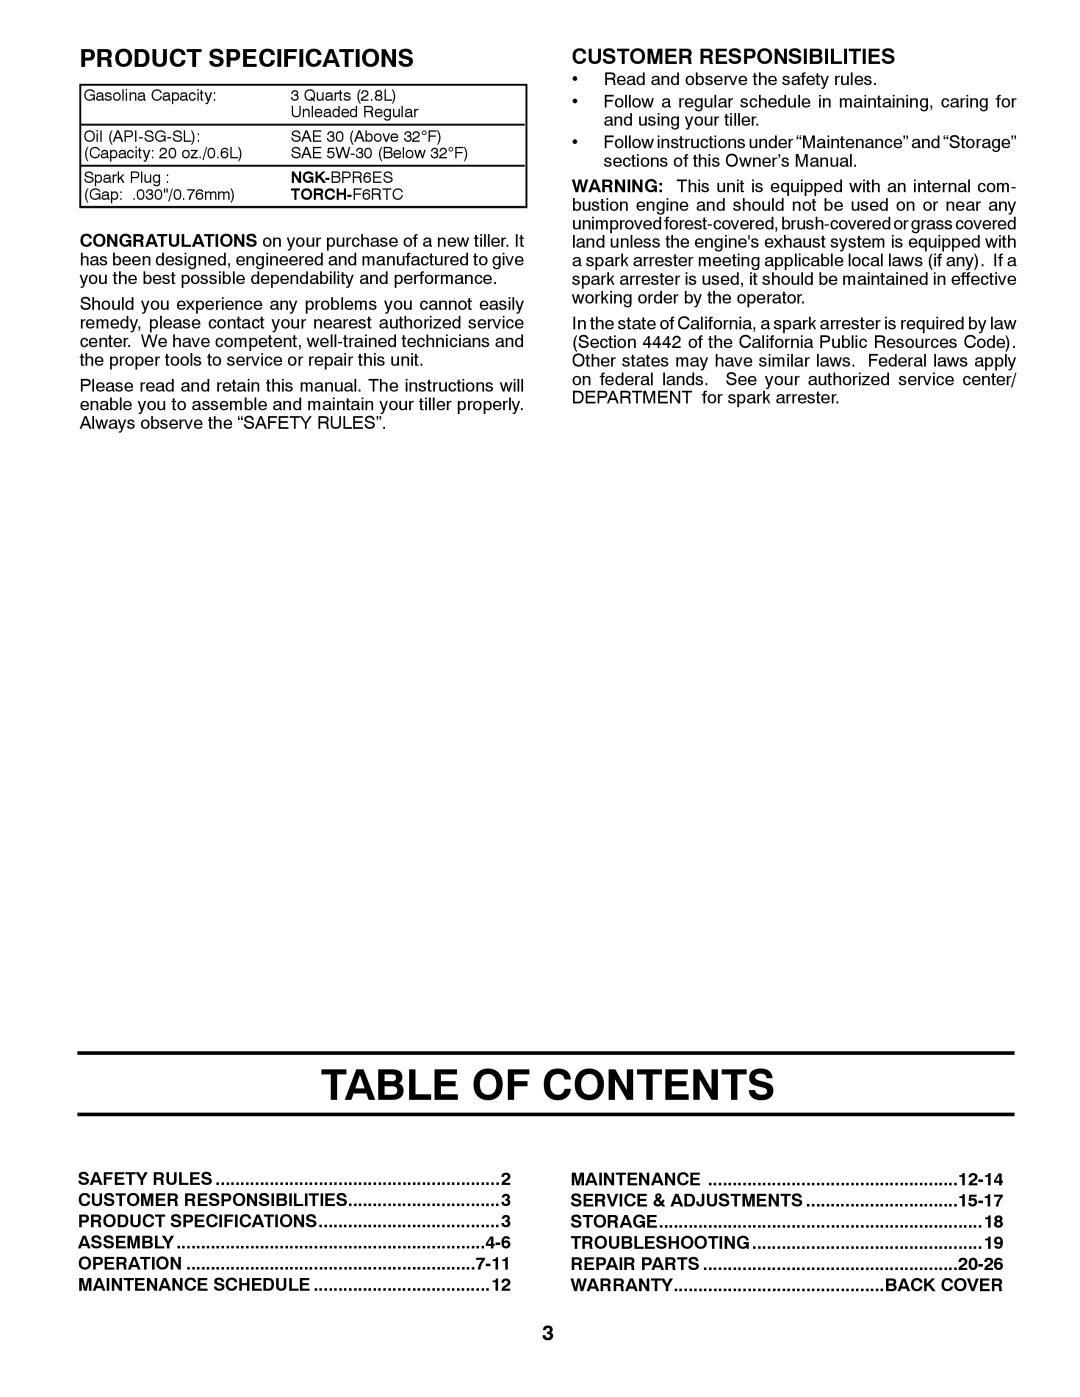 Husqvarna DRT 900 owner manual Table Of Contents, Product Specifications, Customer Responsibilities 